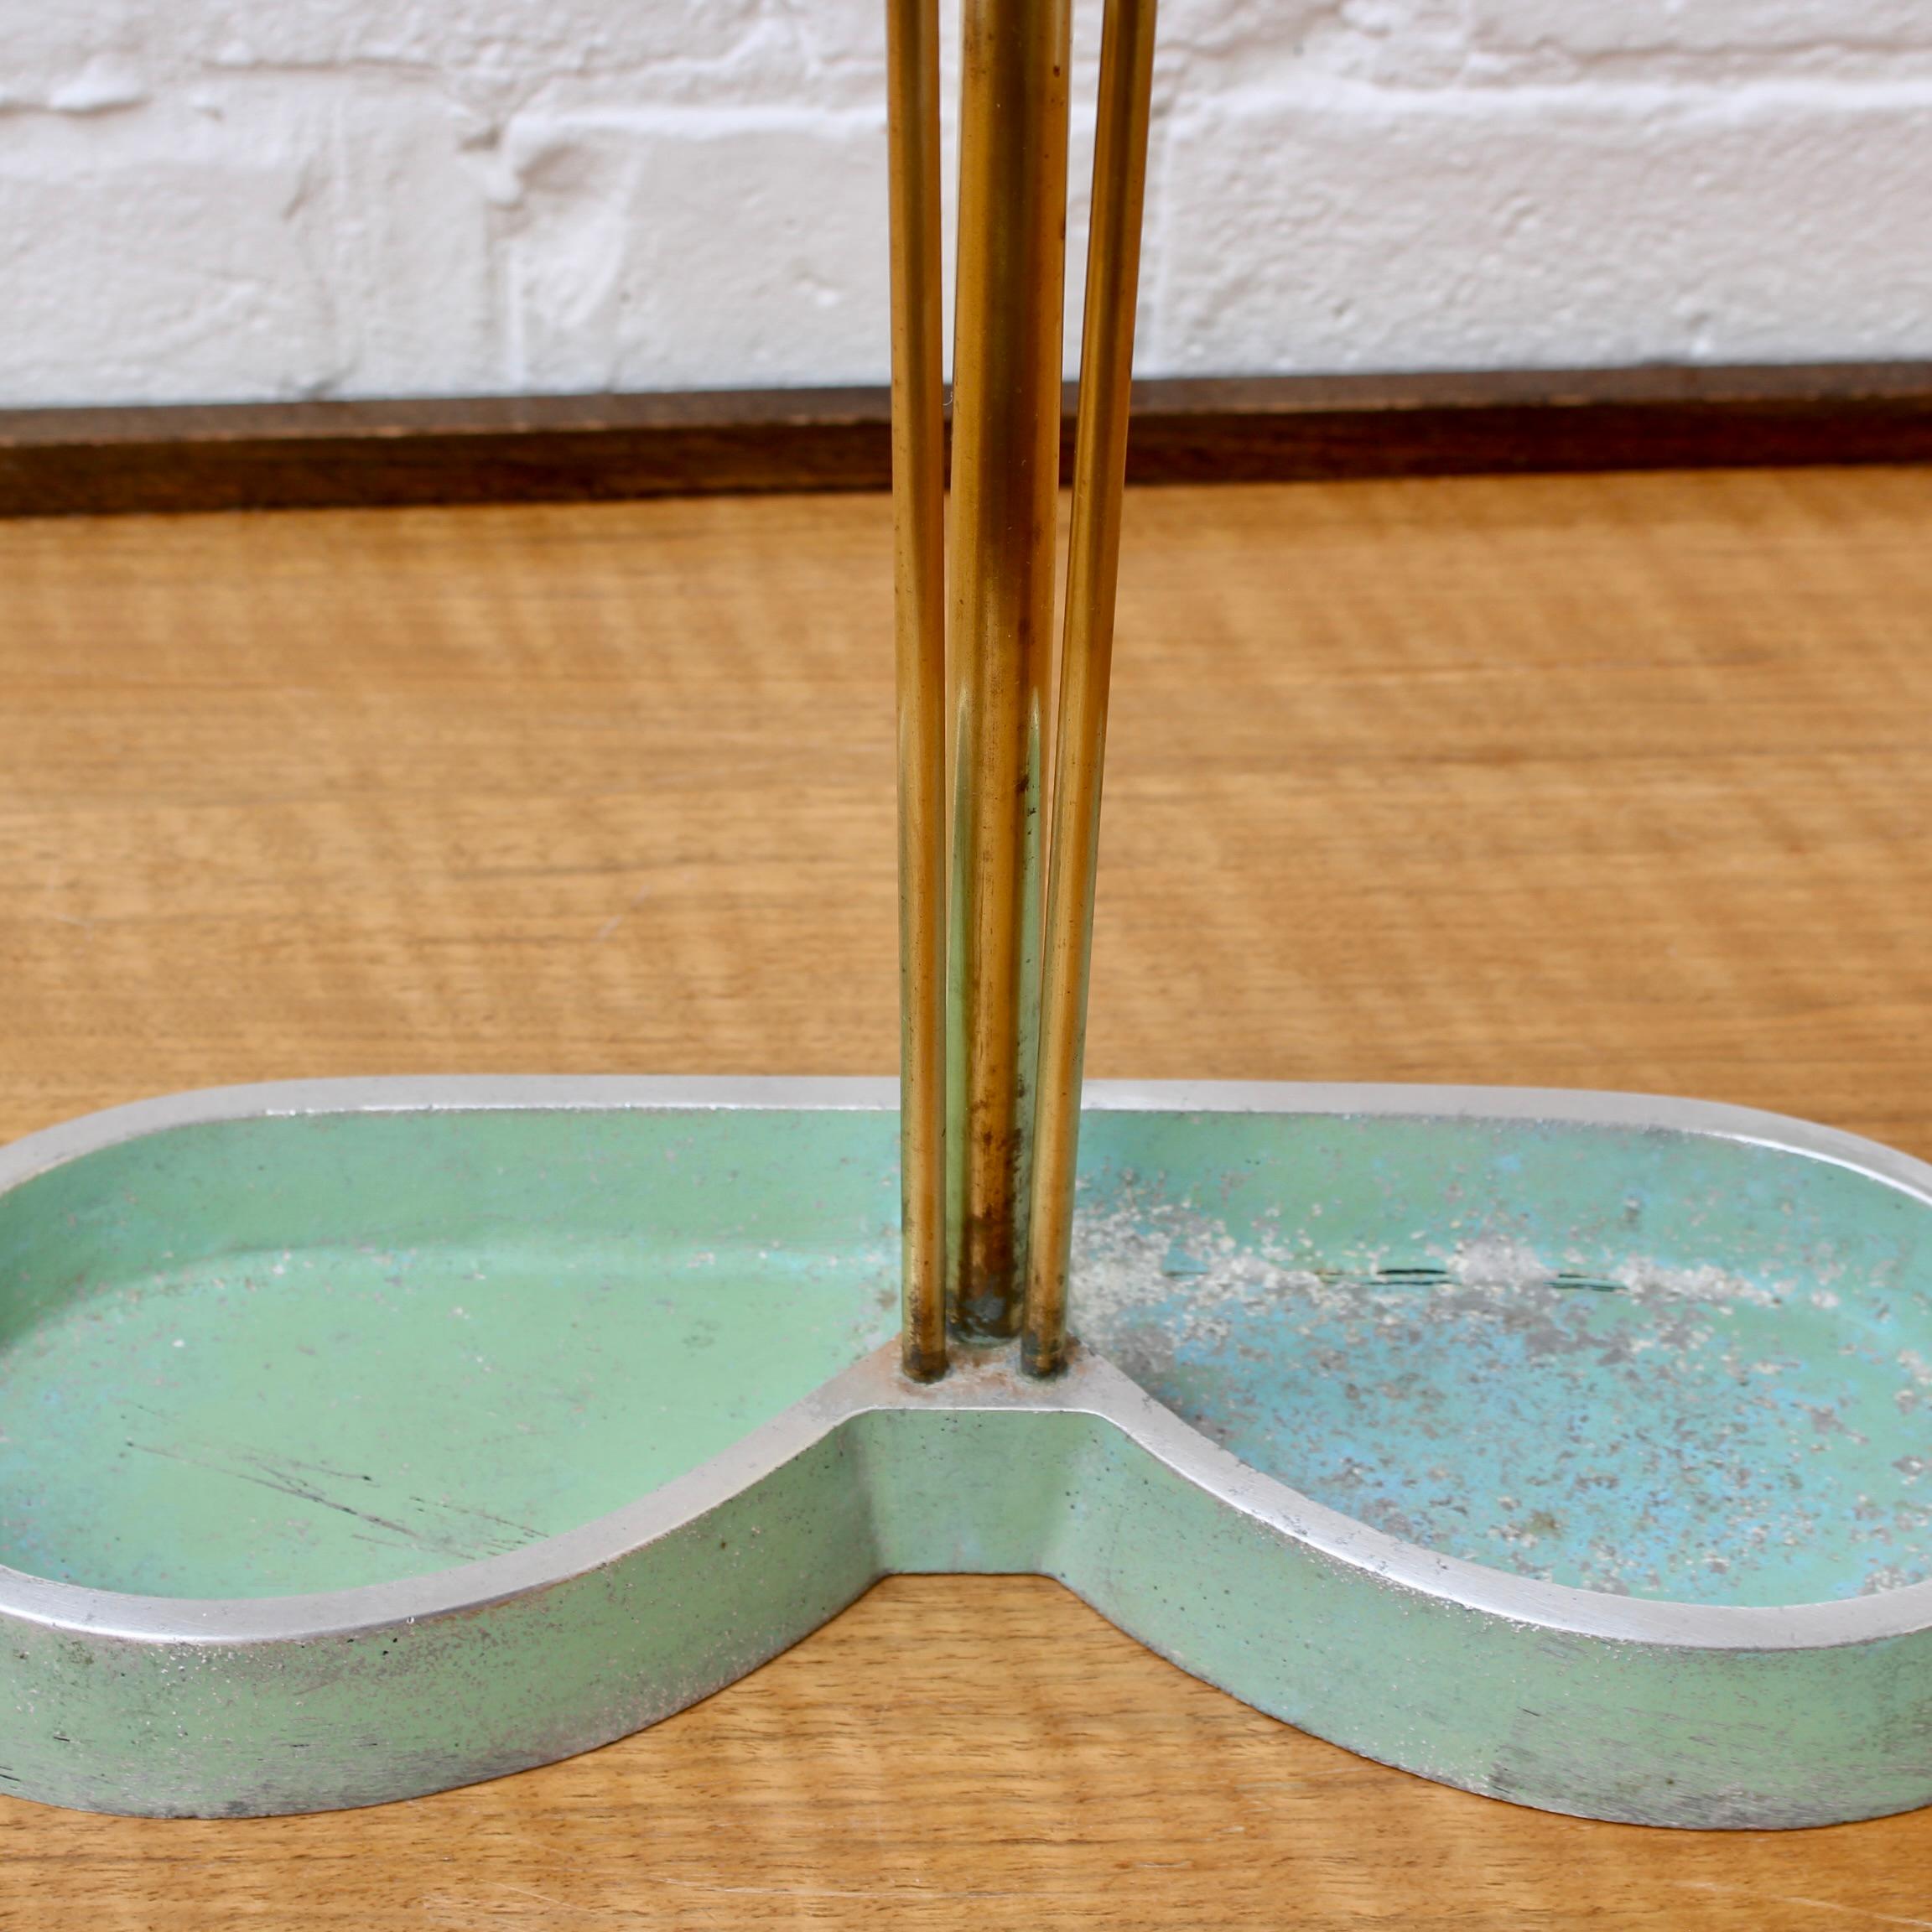 Midcentury Modern Brass Umbrella Stand Attributed to Artes H&H Seefried Steppach For Sale 1